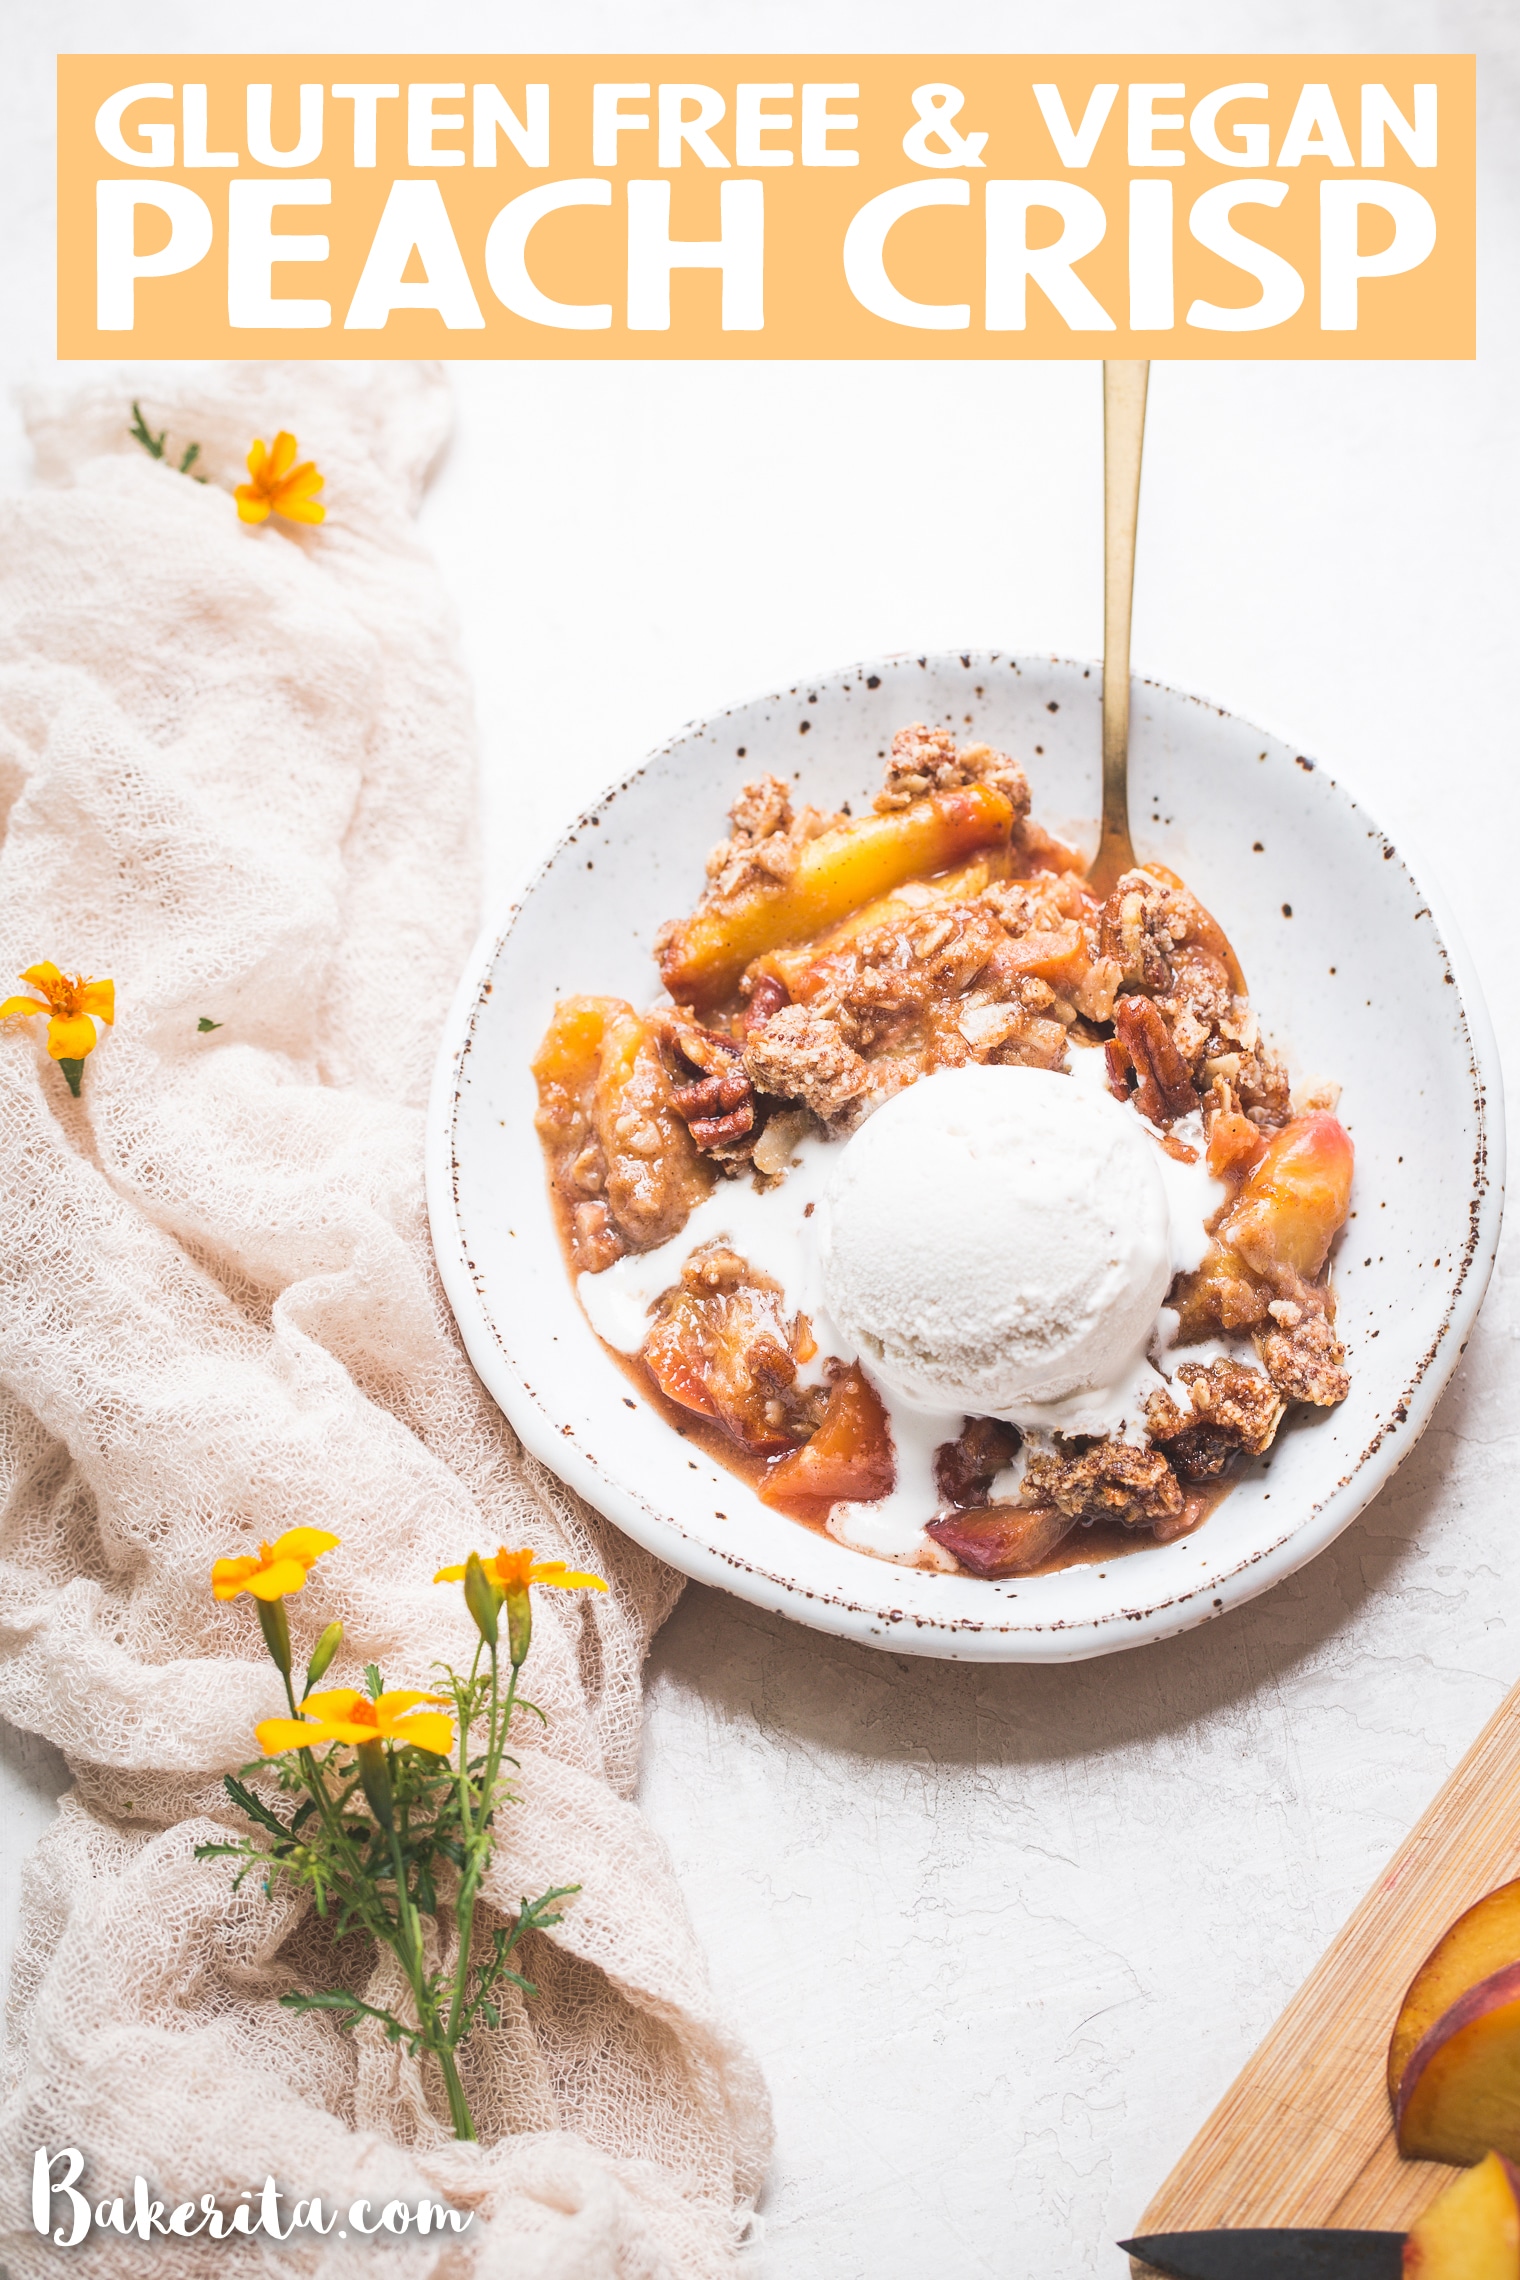 This Gluten-Free & Vegan Peach Crisp recipe is a summer staple! Scented with cinnamon and baked until bubbly, the fresh peaches are perfectly complemented by the pecan crisp topping. Top with a scoop of ice cream for the perfect dessert!